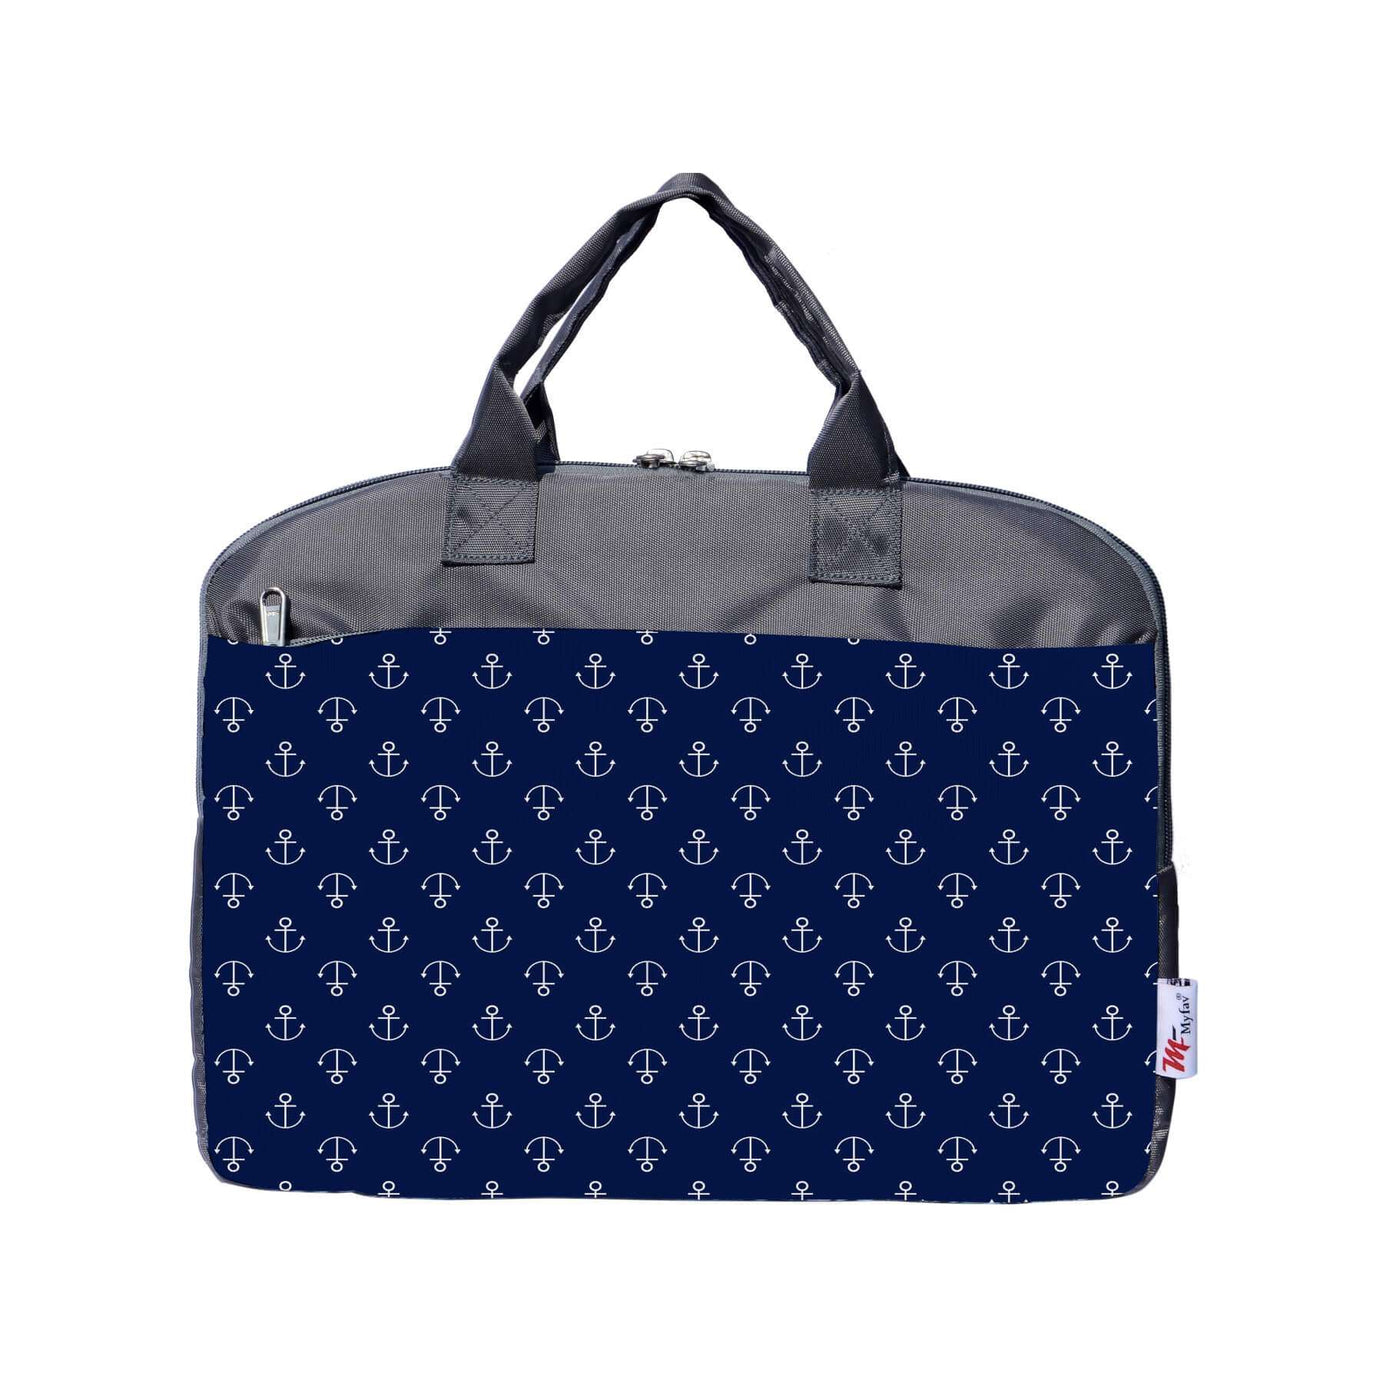 My Fav Printed Blue Office Laptop Bag Briefcase 15.6 Inch for Women and Men